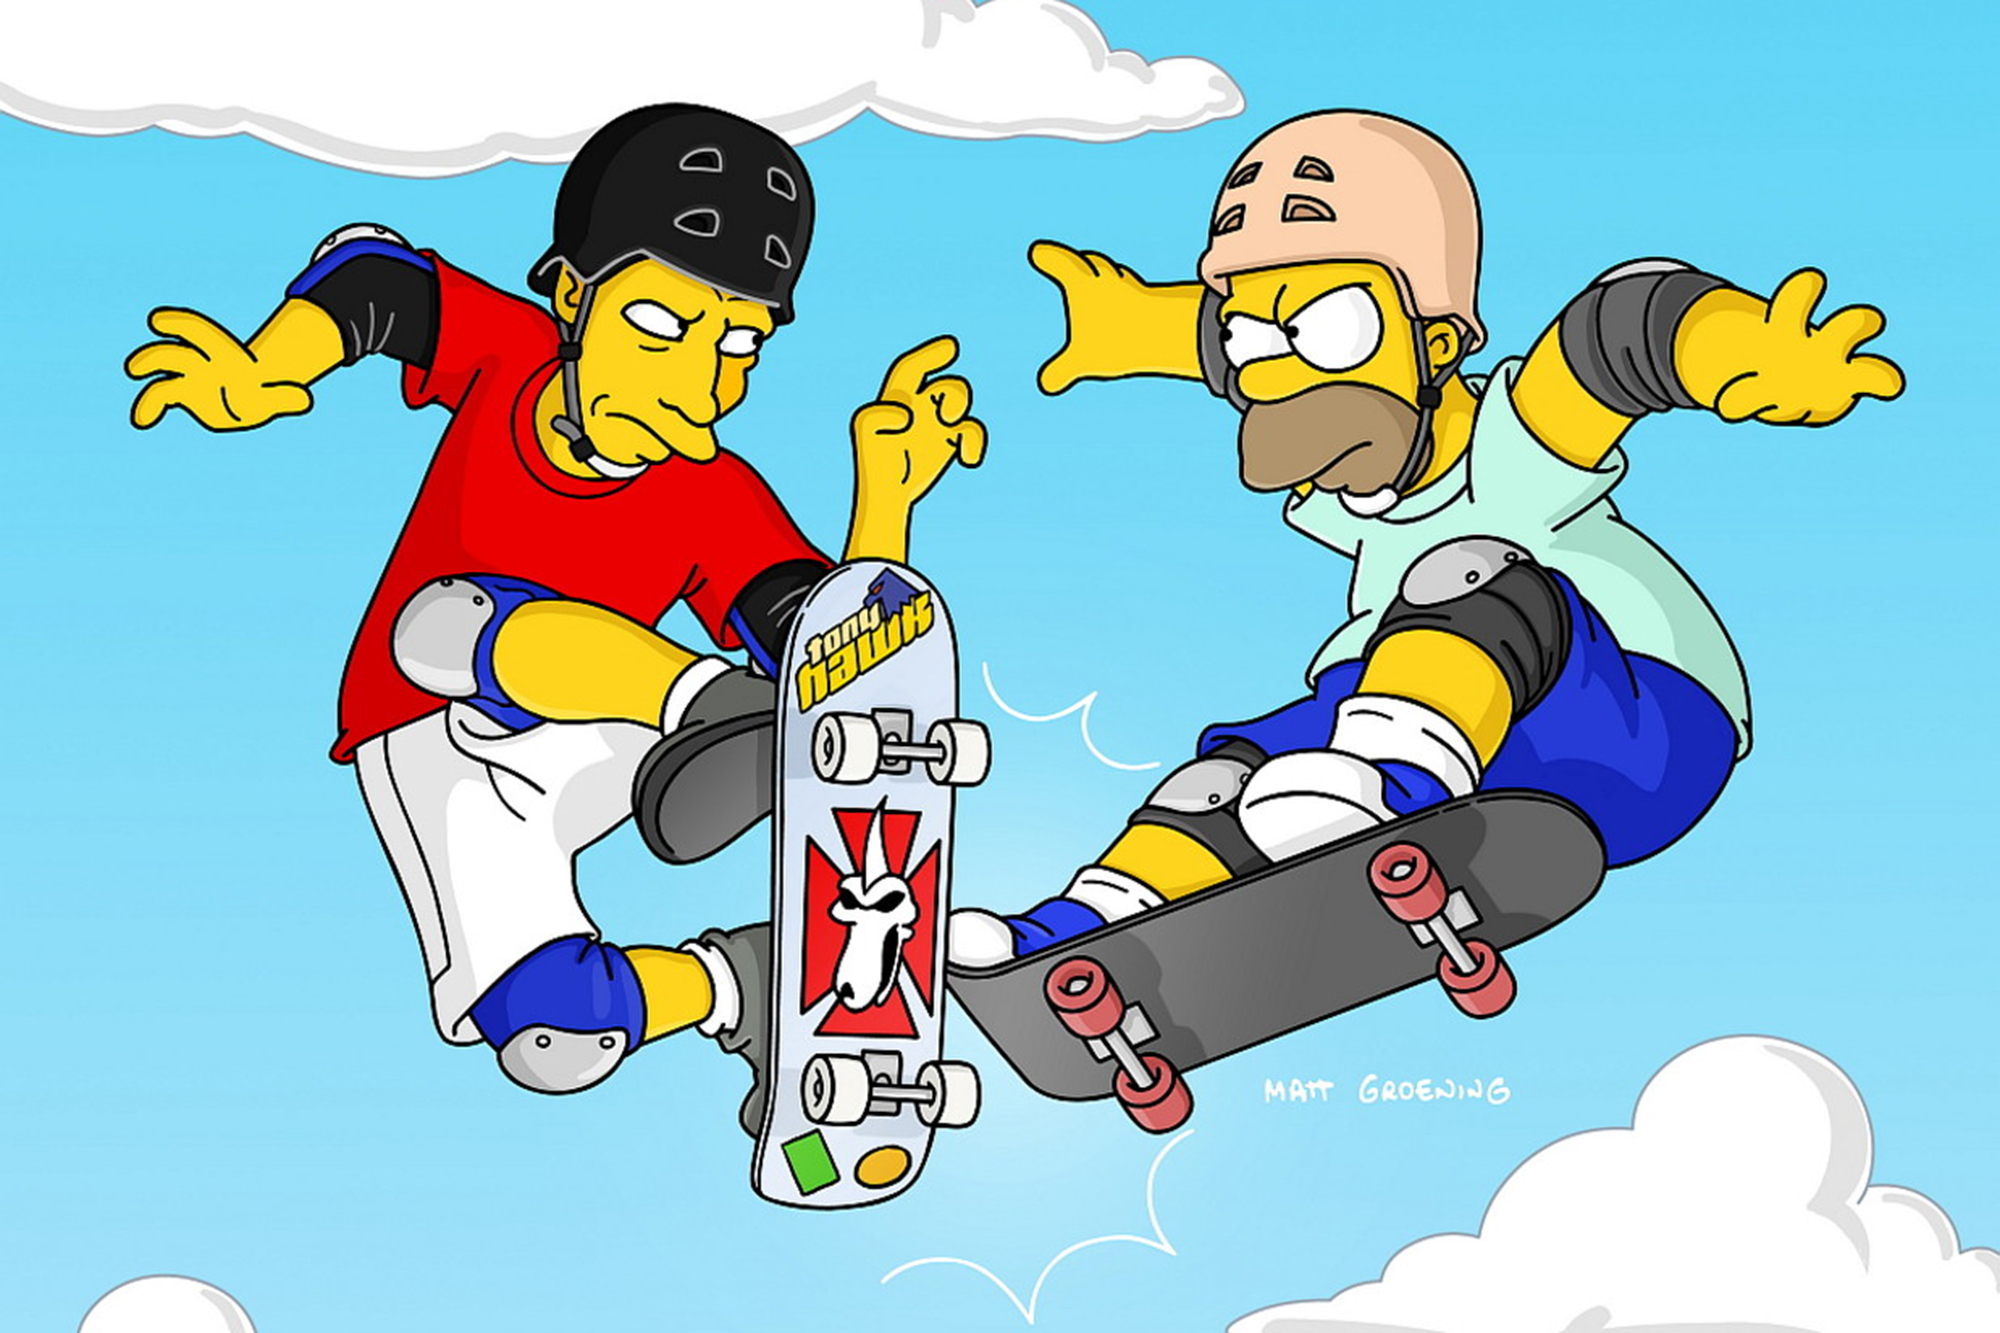 Tony Hawk: The pro skater appeared as himself in the 2003 episode "Barting Over," in which Bart gets angry with his dad and moves out, befriending new neighbor Hawk, who lets Homer beat him in a competition so that Bart can move back home.